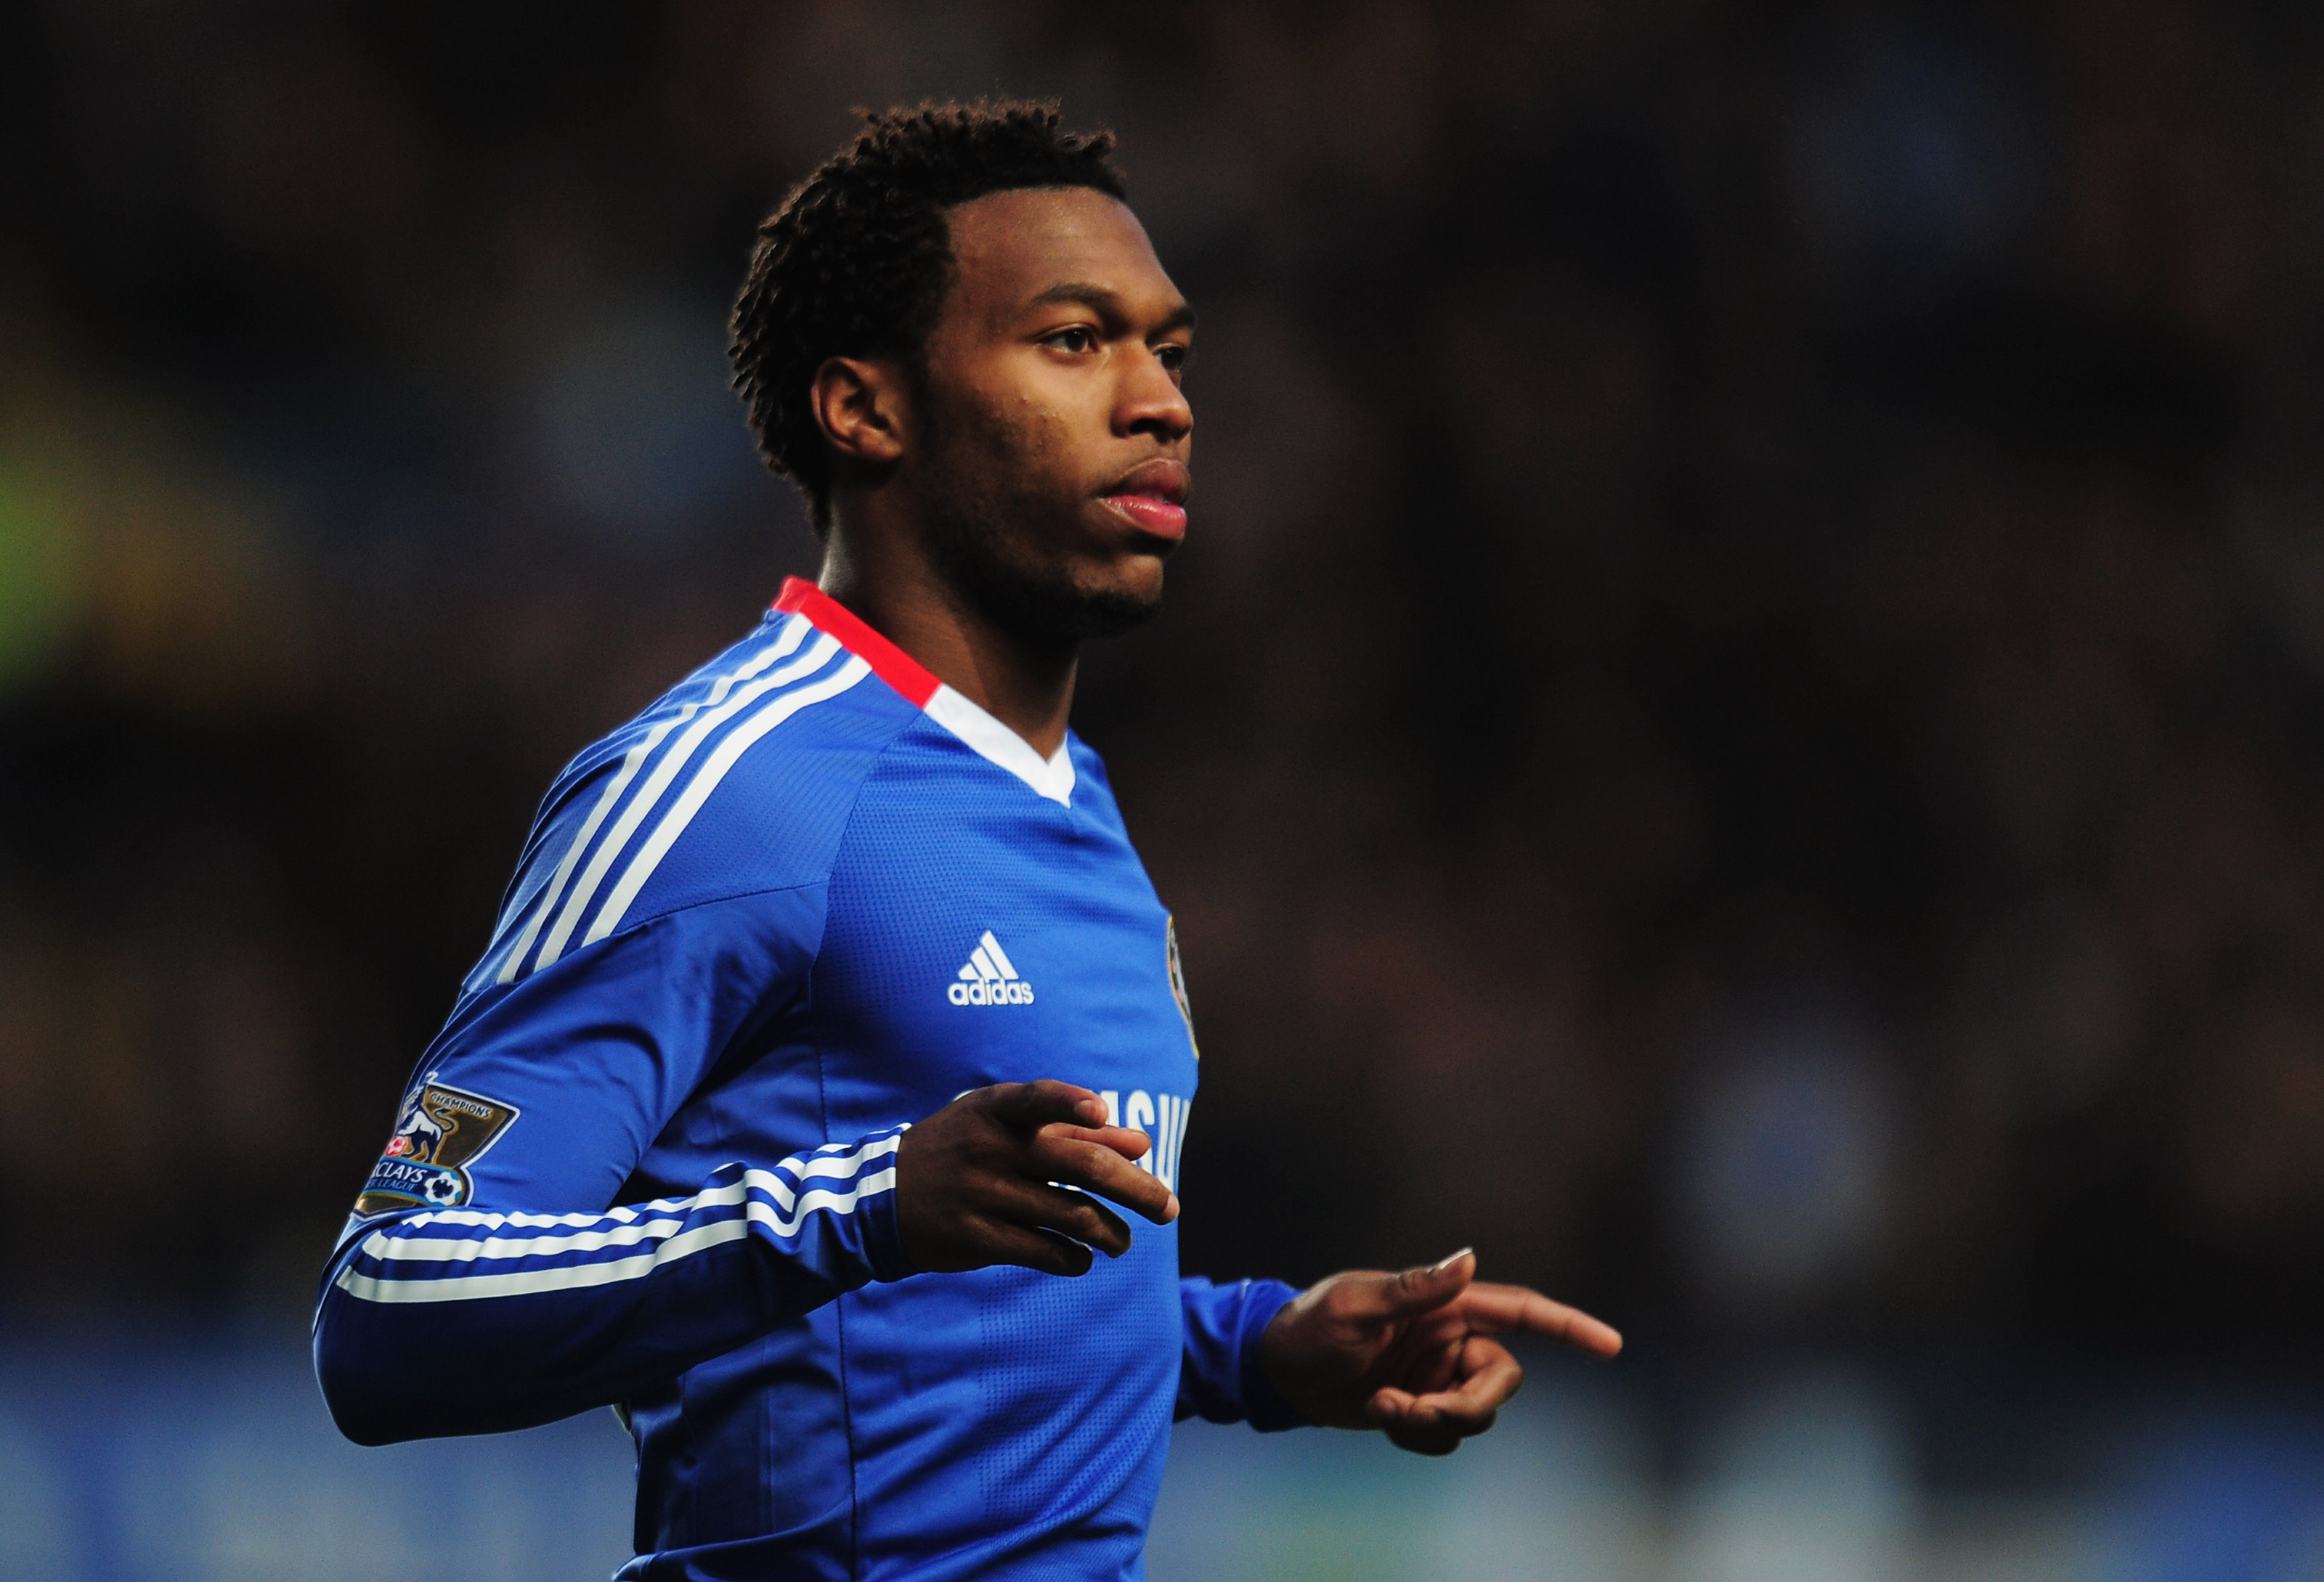 LONDON, ENGLAND - JANUARY 09:  Daniel Sturridge of Chelsea celebrates as he scores their fifth goal during the FA Cup sponsored by E.ON 3rd round match between Chelsea and Ipswich Town at Stamford Bridge on January 9, 2011 in London, England.  (Photo by S